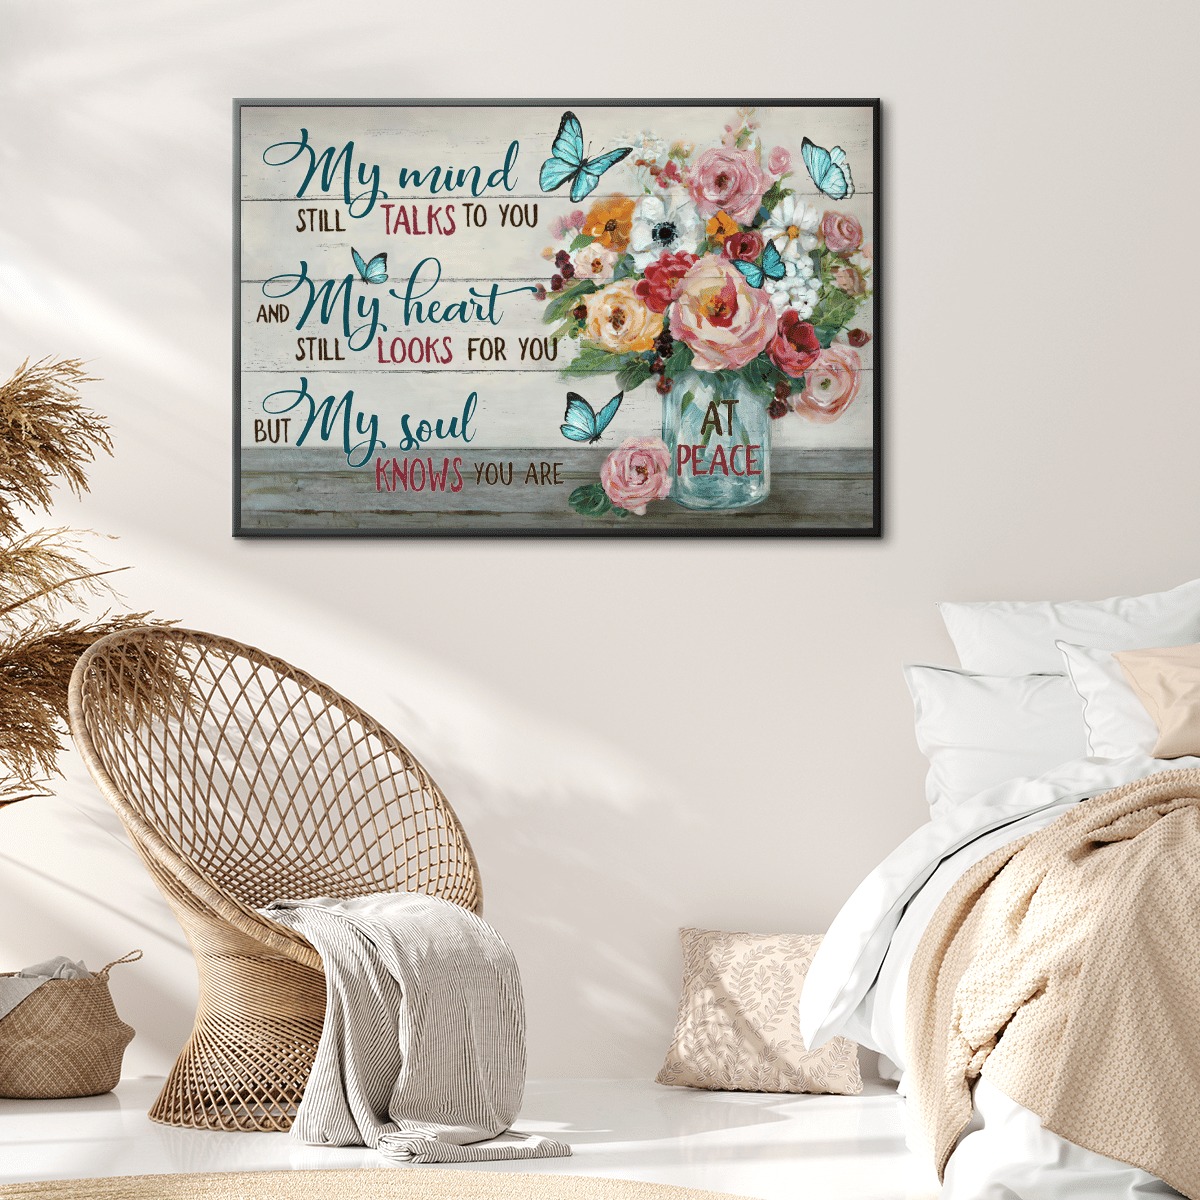 Jesus Flower vase My mind still talks to you at peace poster, canvas 9